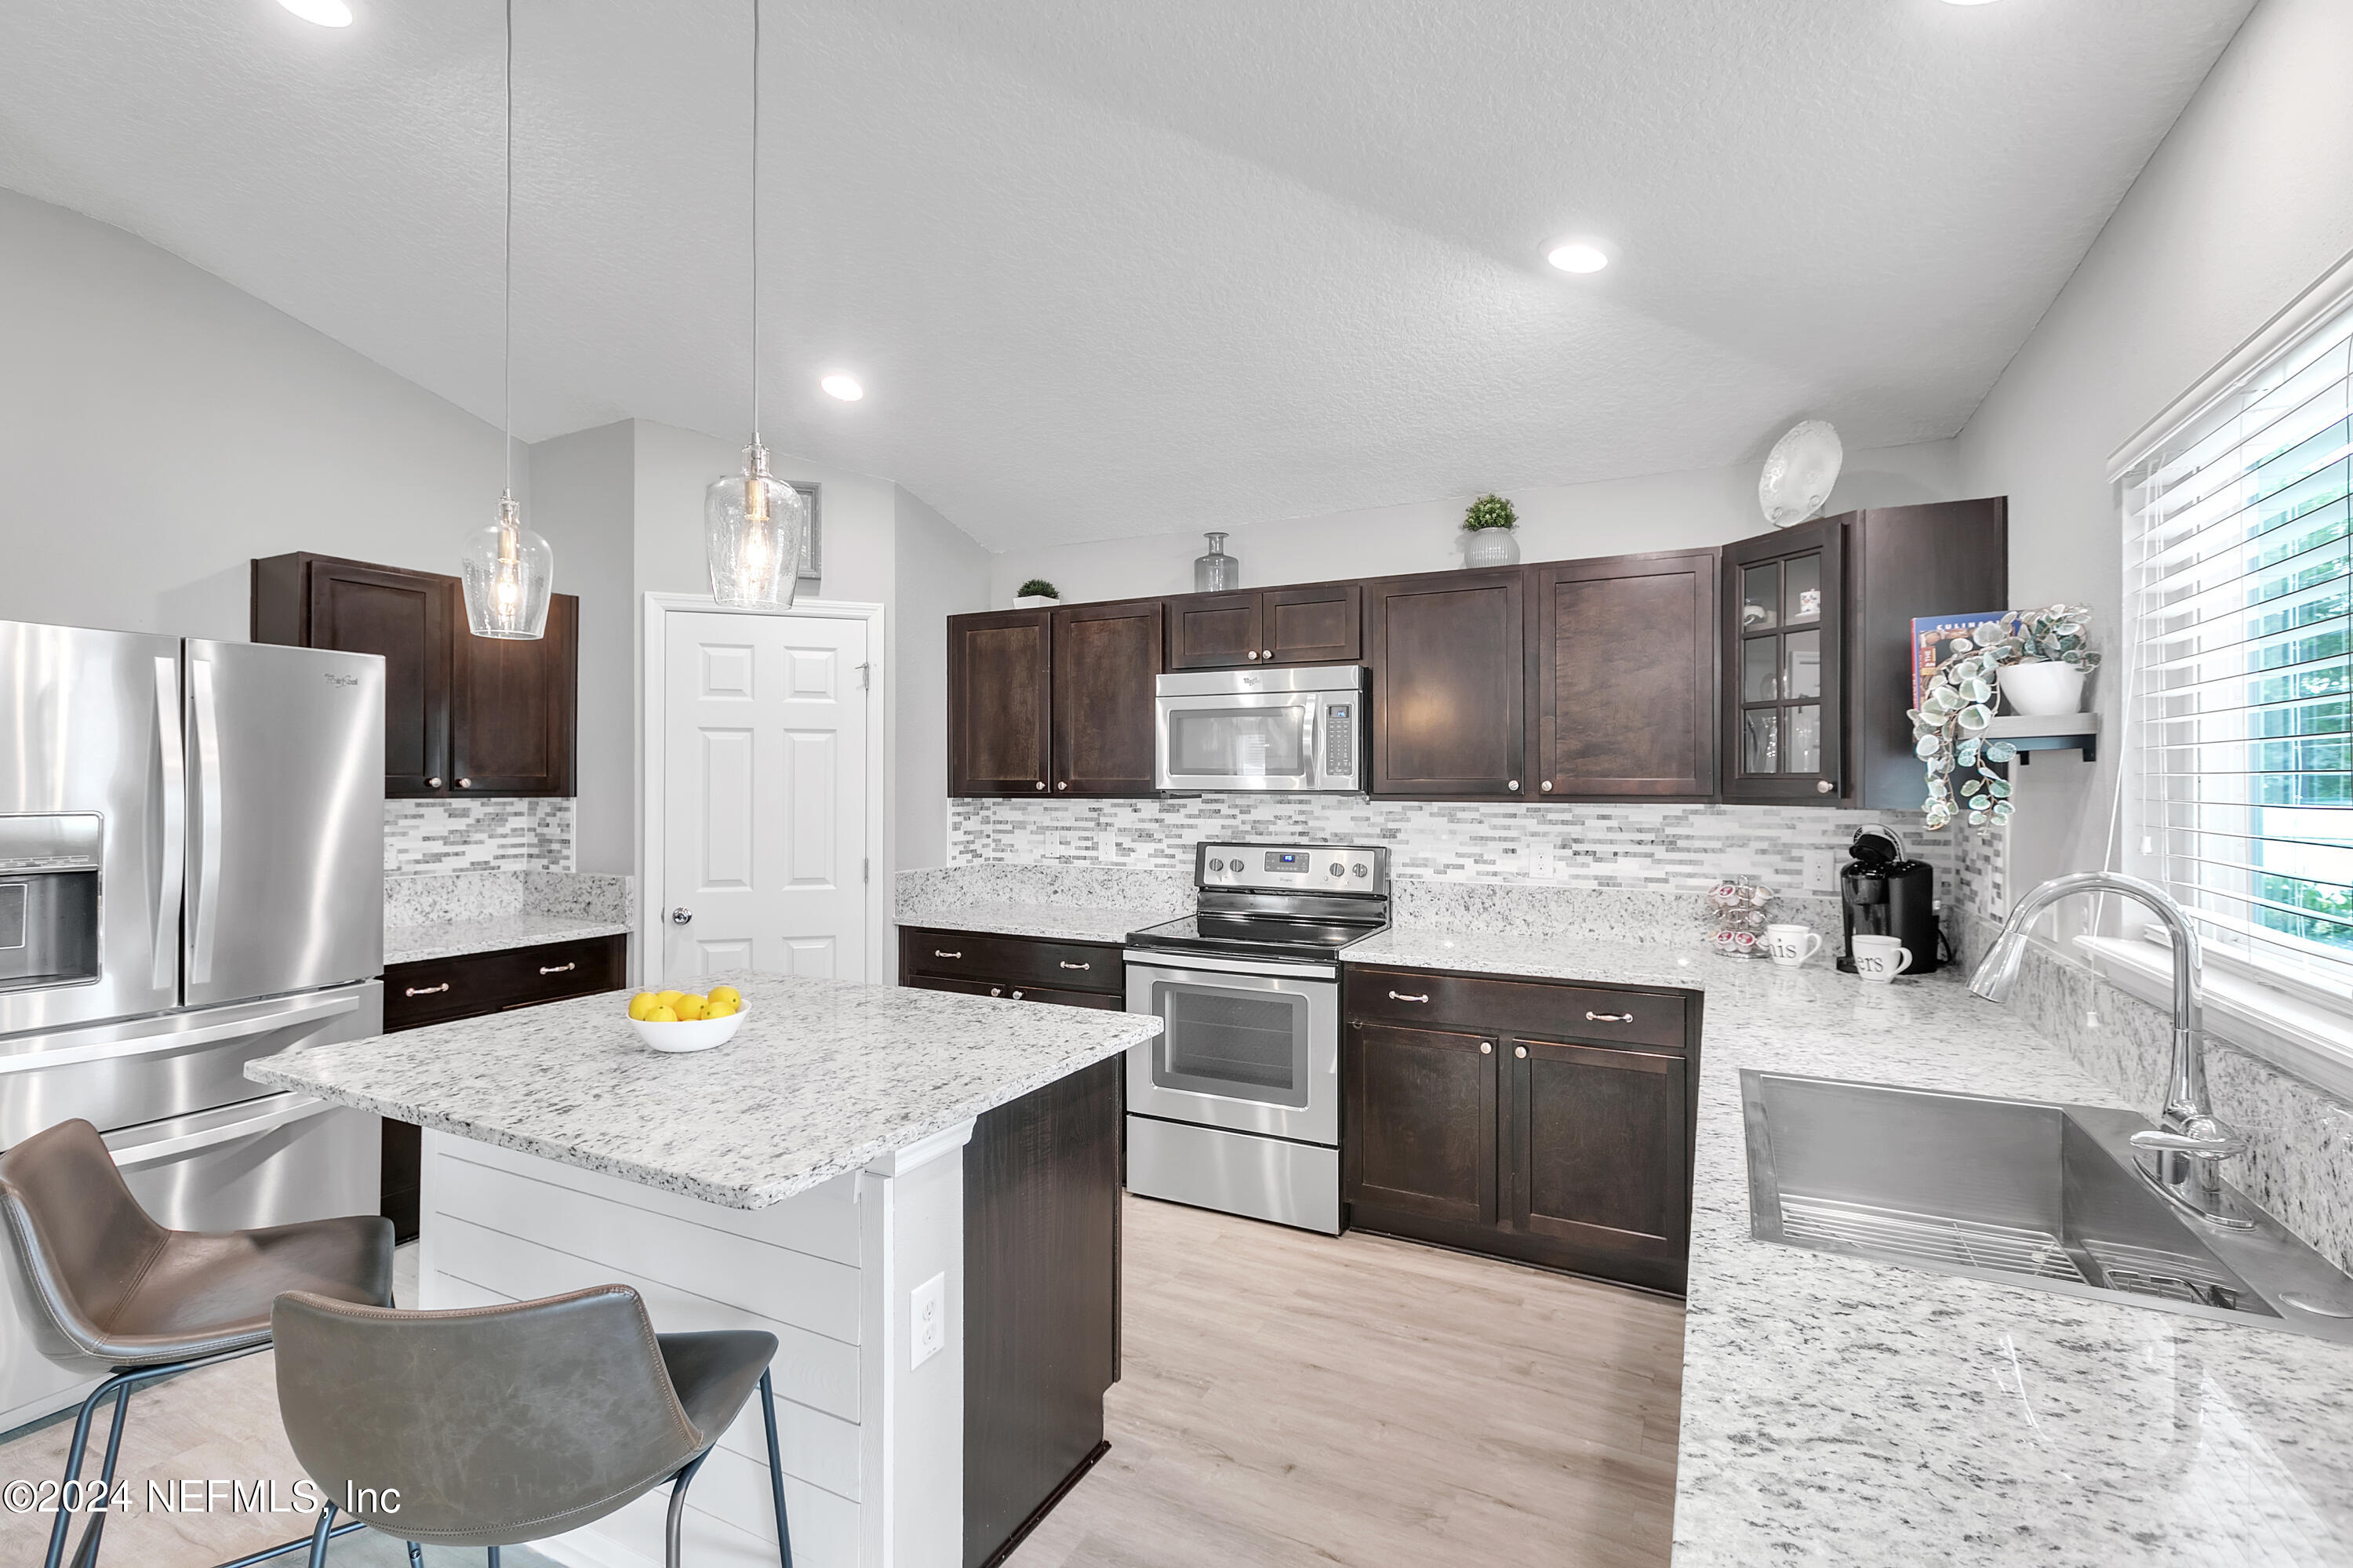 a kitchen with stainless steel appliances kitchen island granite countertop a sink and a stove top oven with wooden floor